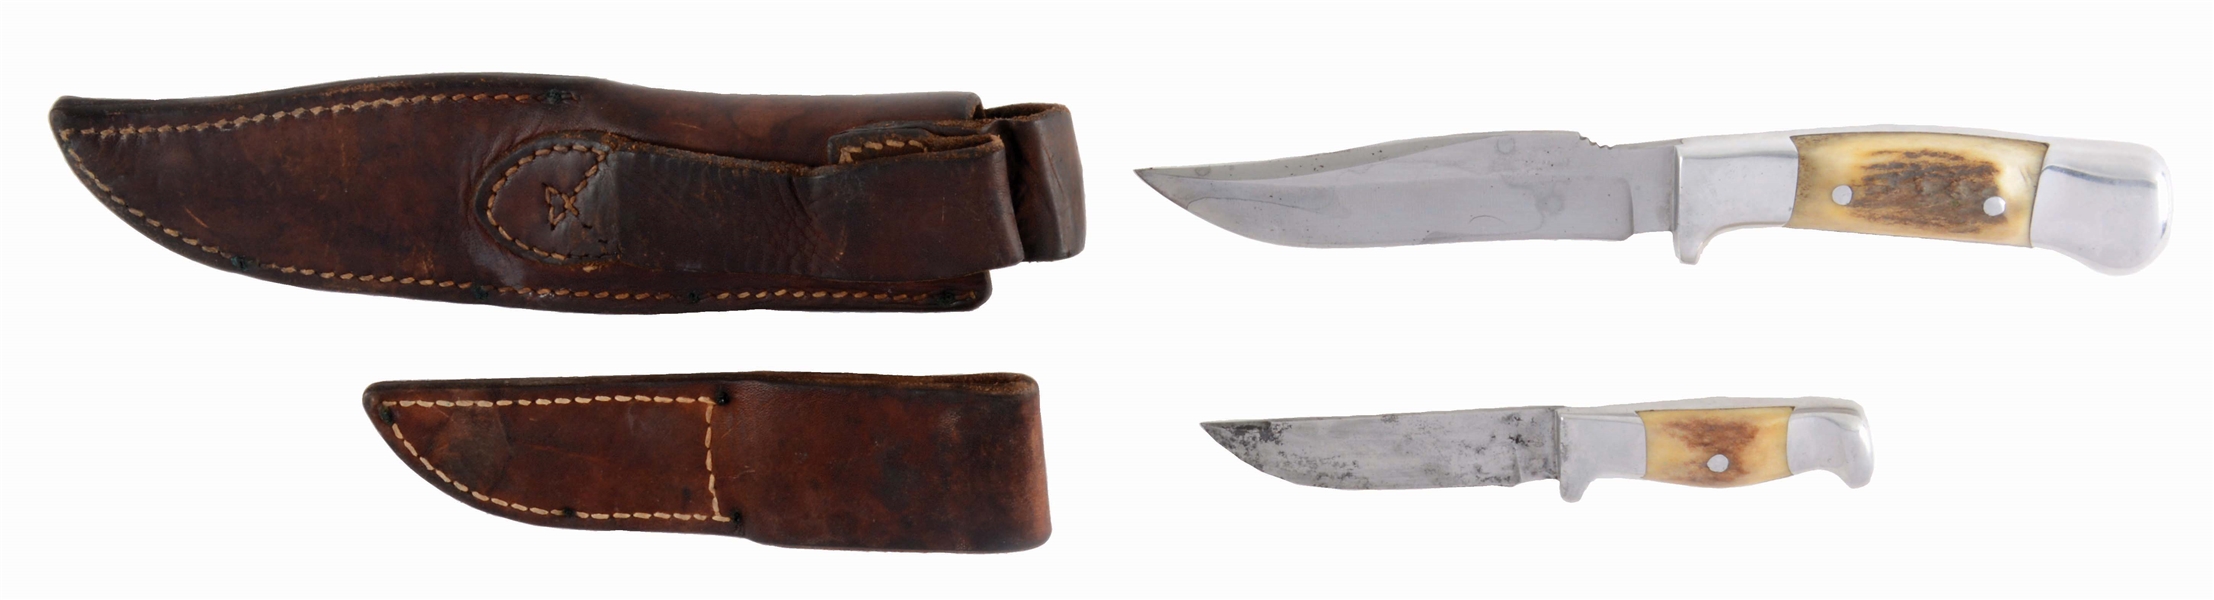 PAIR OF R.H. RUANA HUNTING KNIVES WITH SCABBARDS.